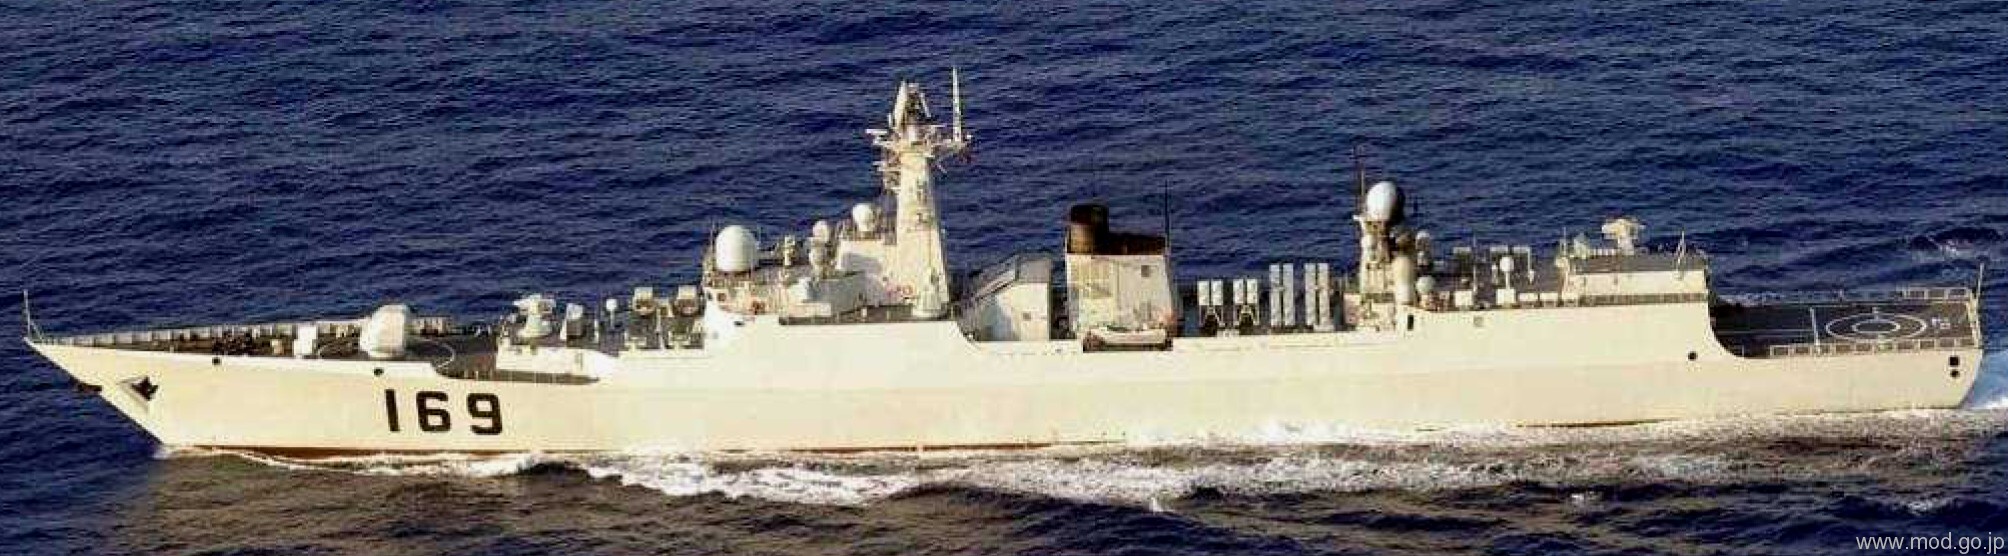 type 052b luyang-i class guided missile destroyer ddg-169 plans wuhan china people's liberation army navy 02